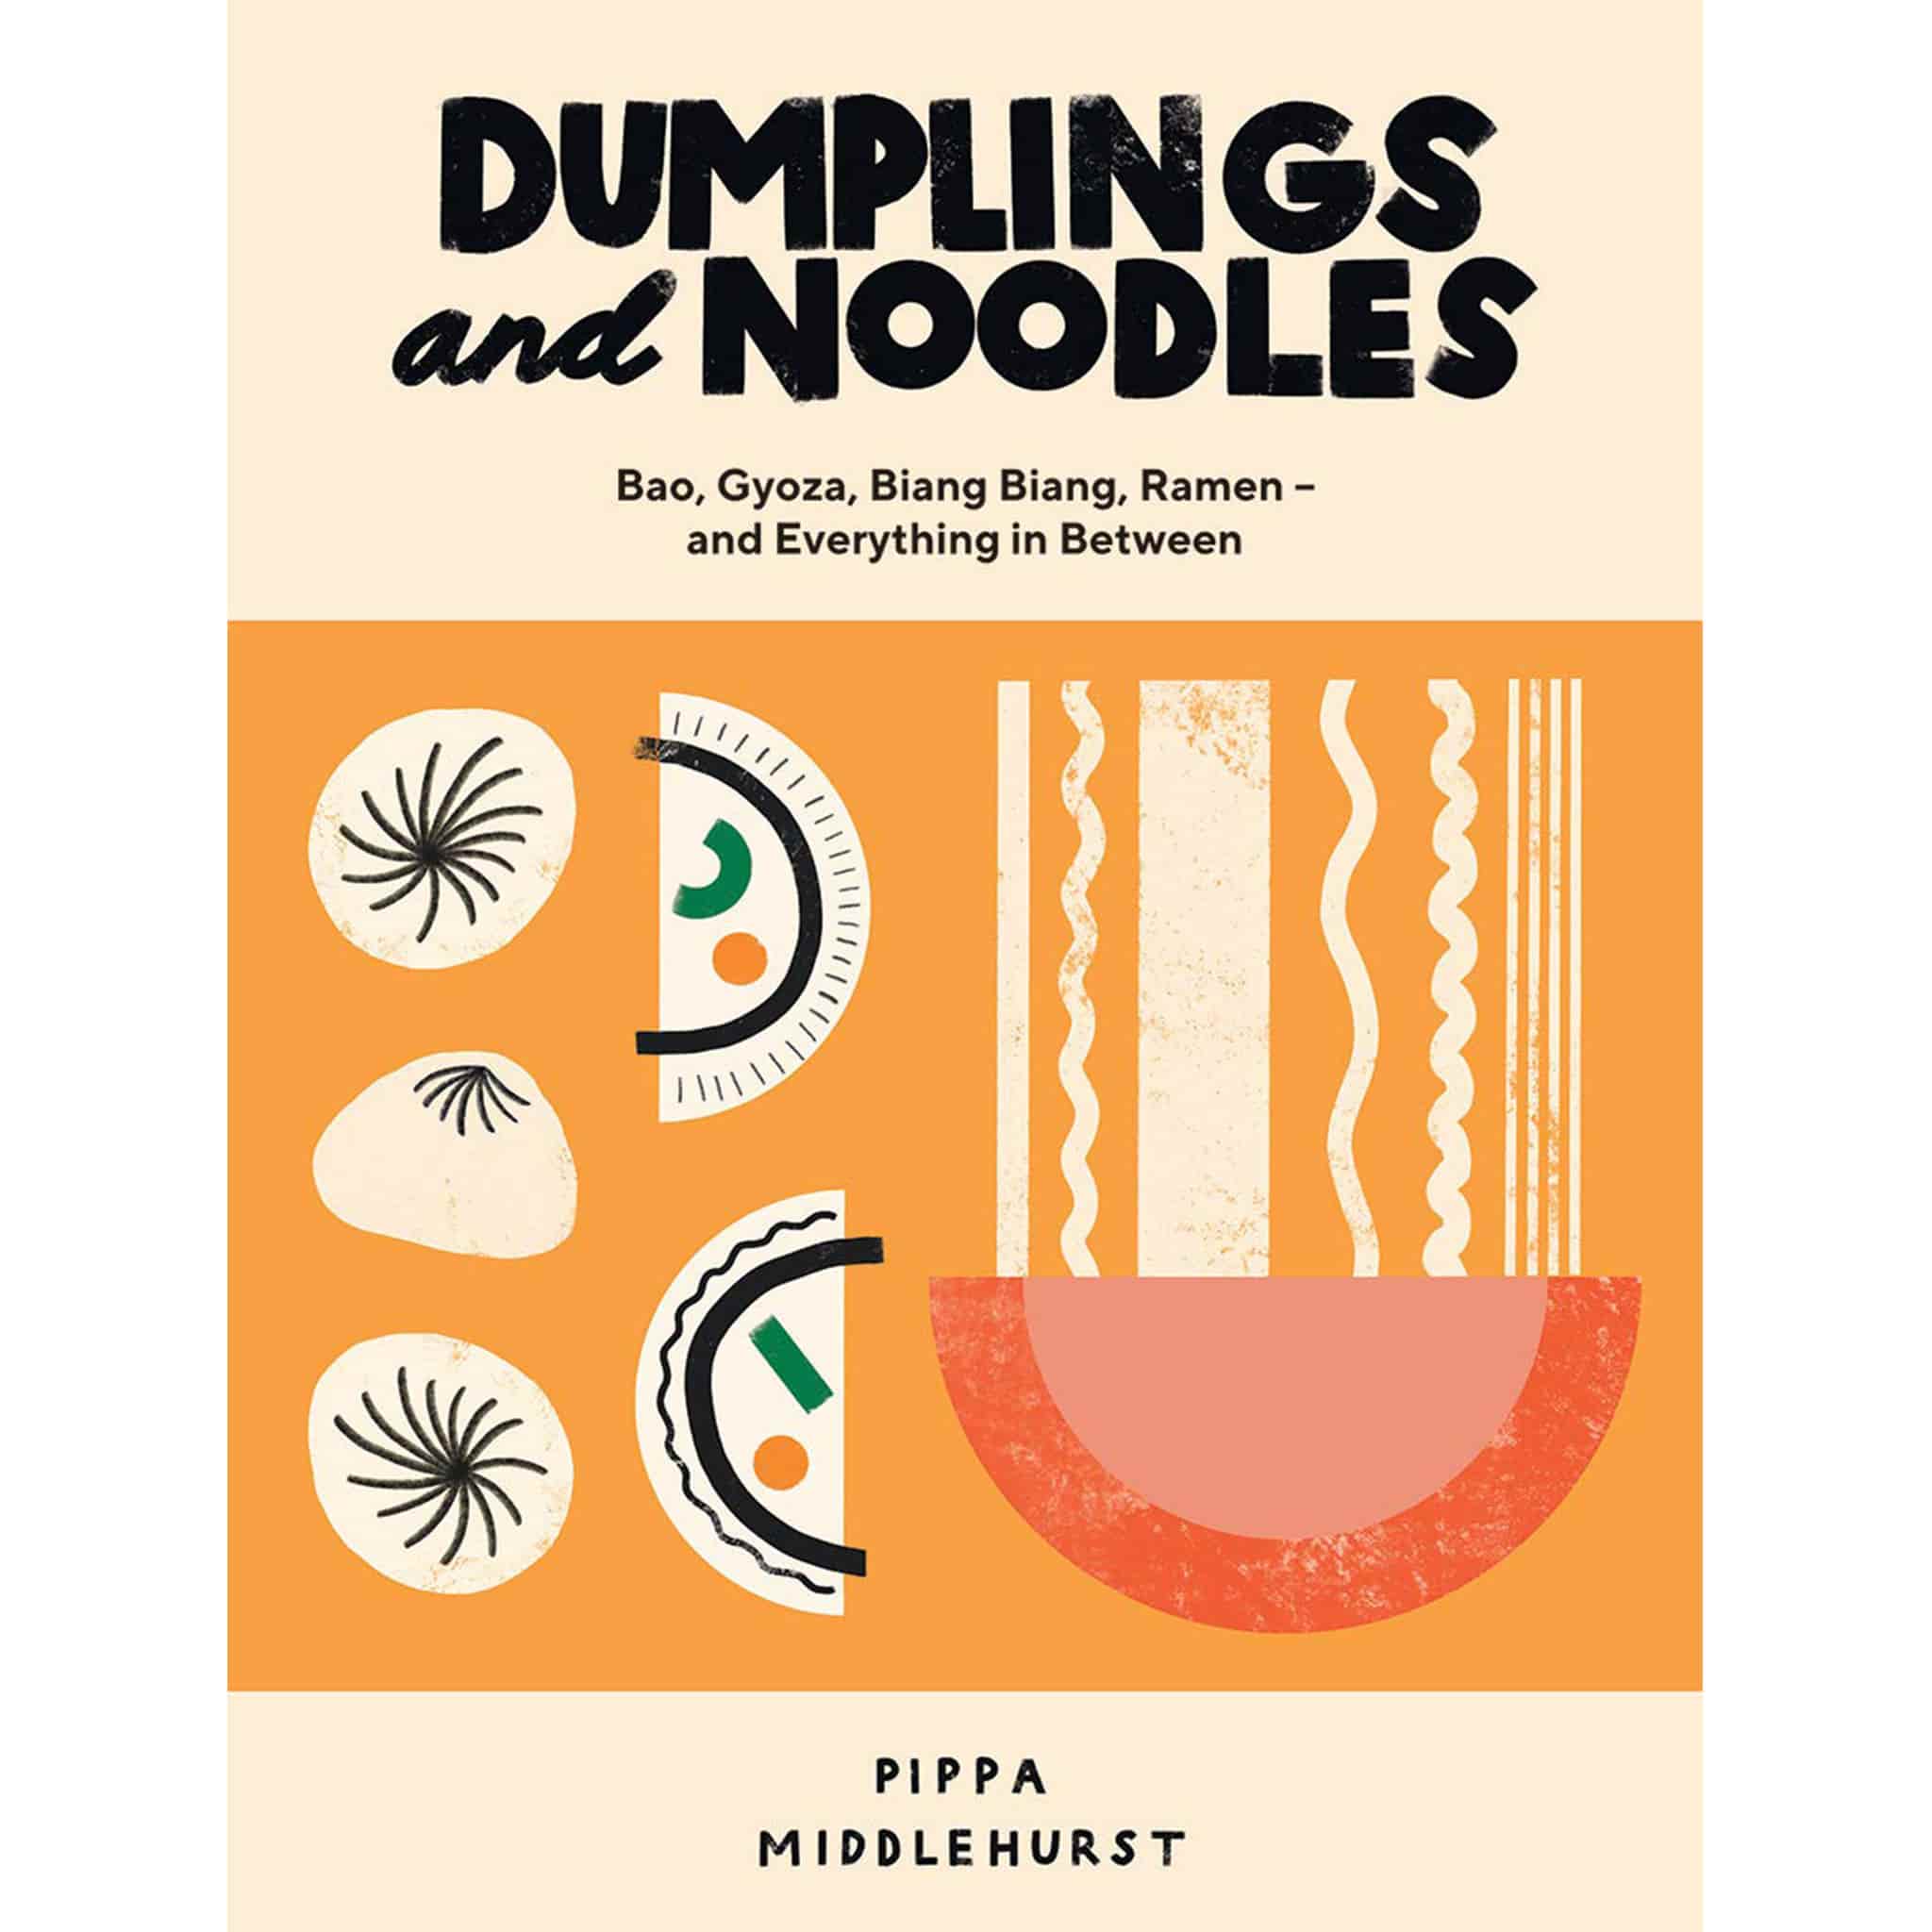 Dumplings and Noodles by Pippa Middlehurst